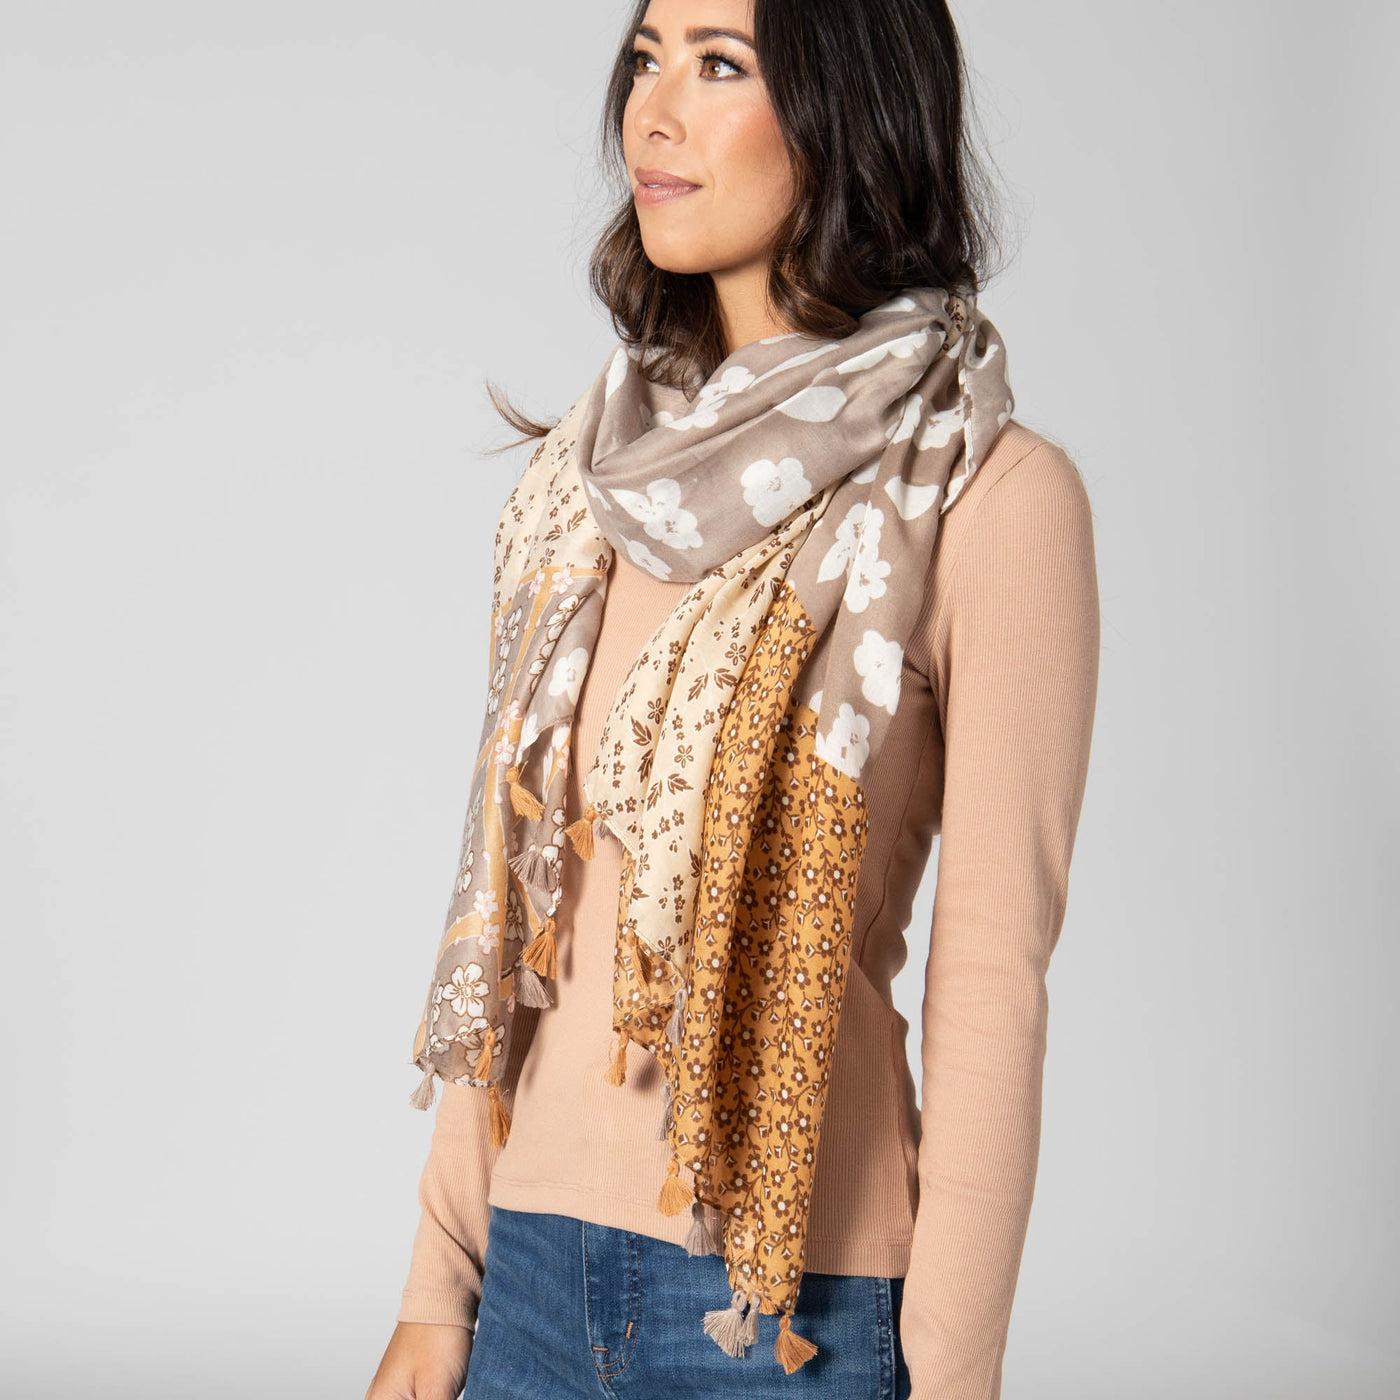 SCARF - Natural Beauty - Light Weight Woven Multi Floral Scarf